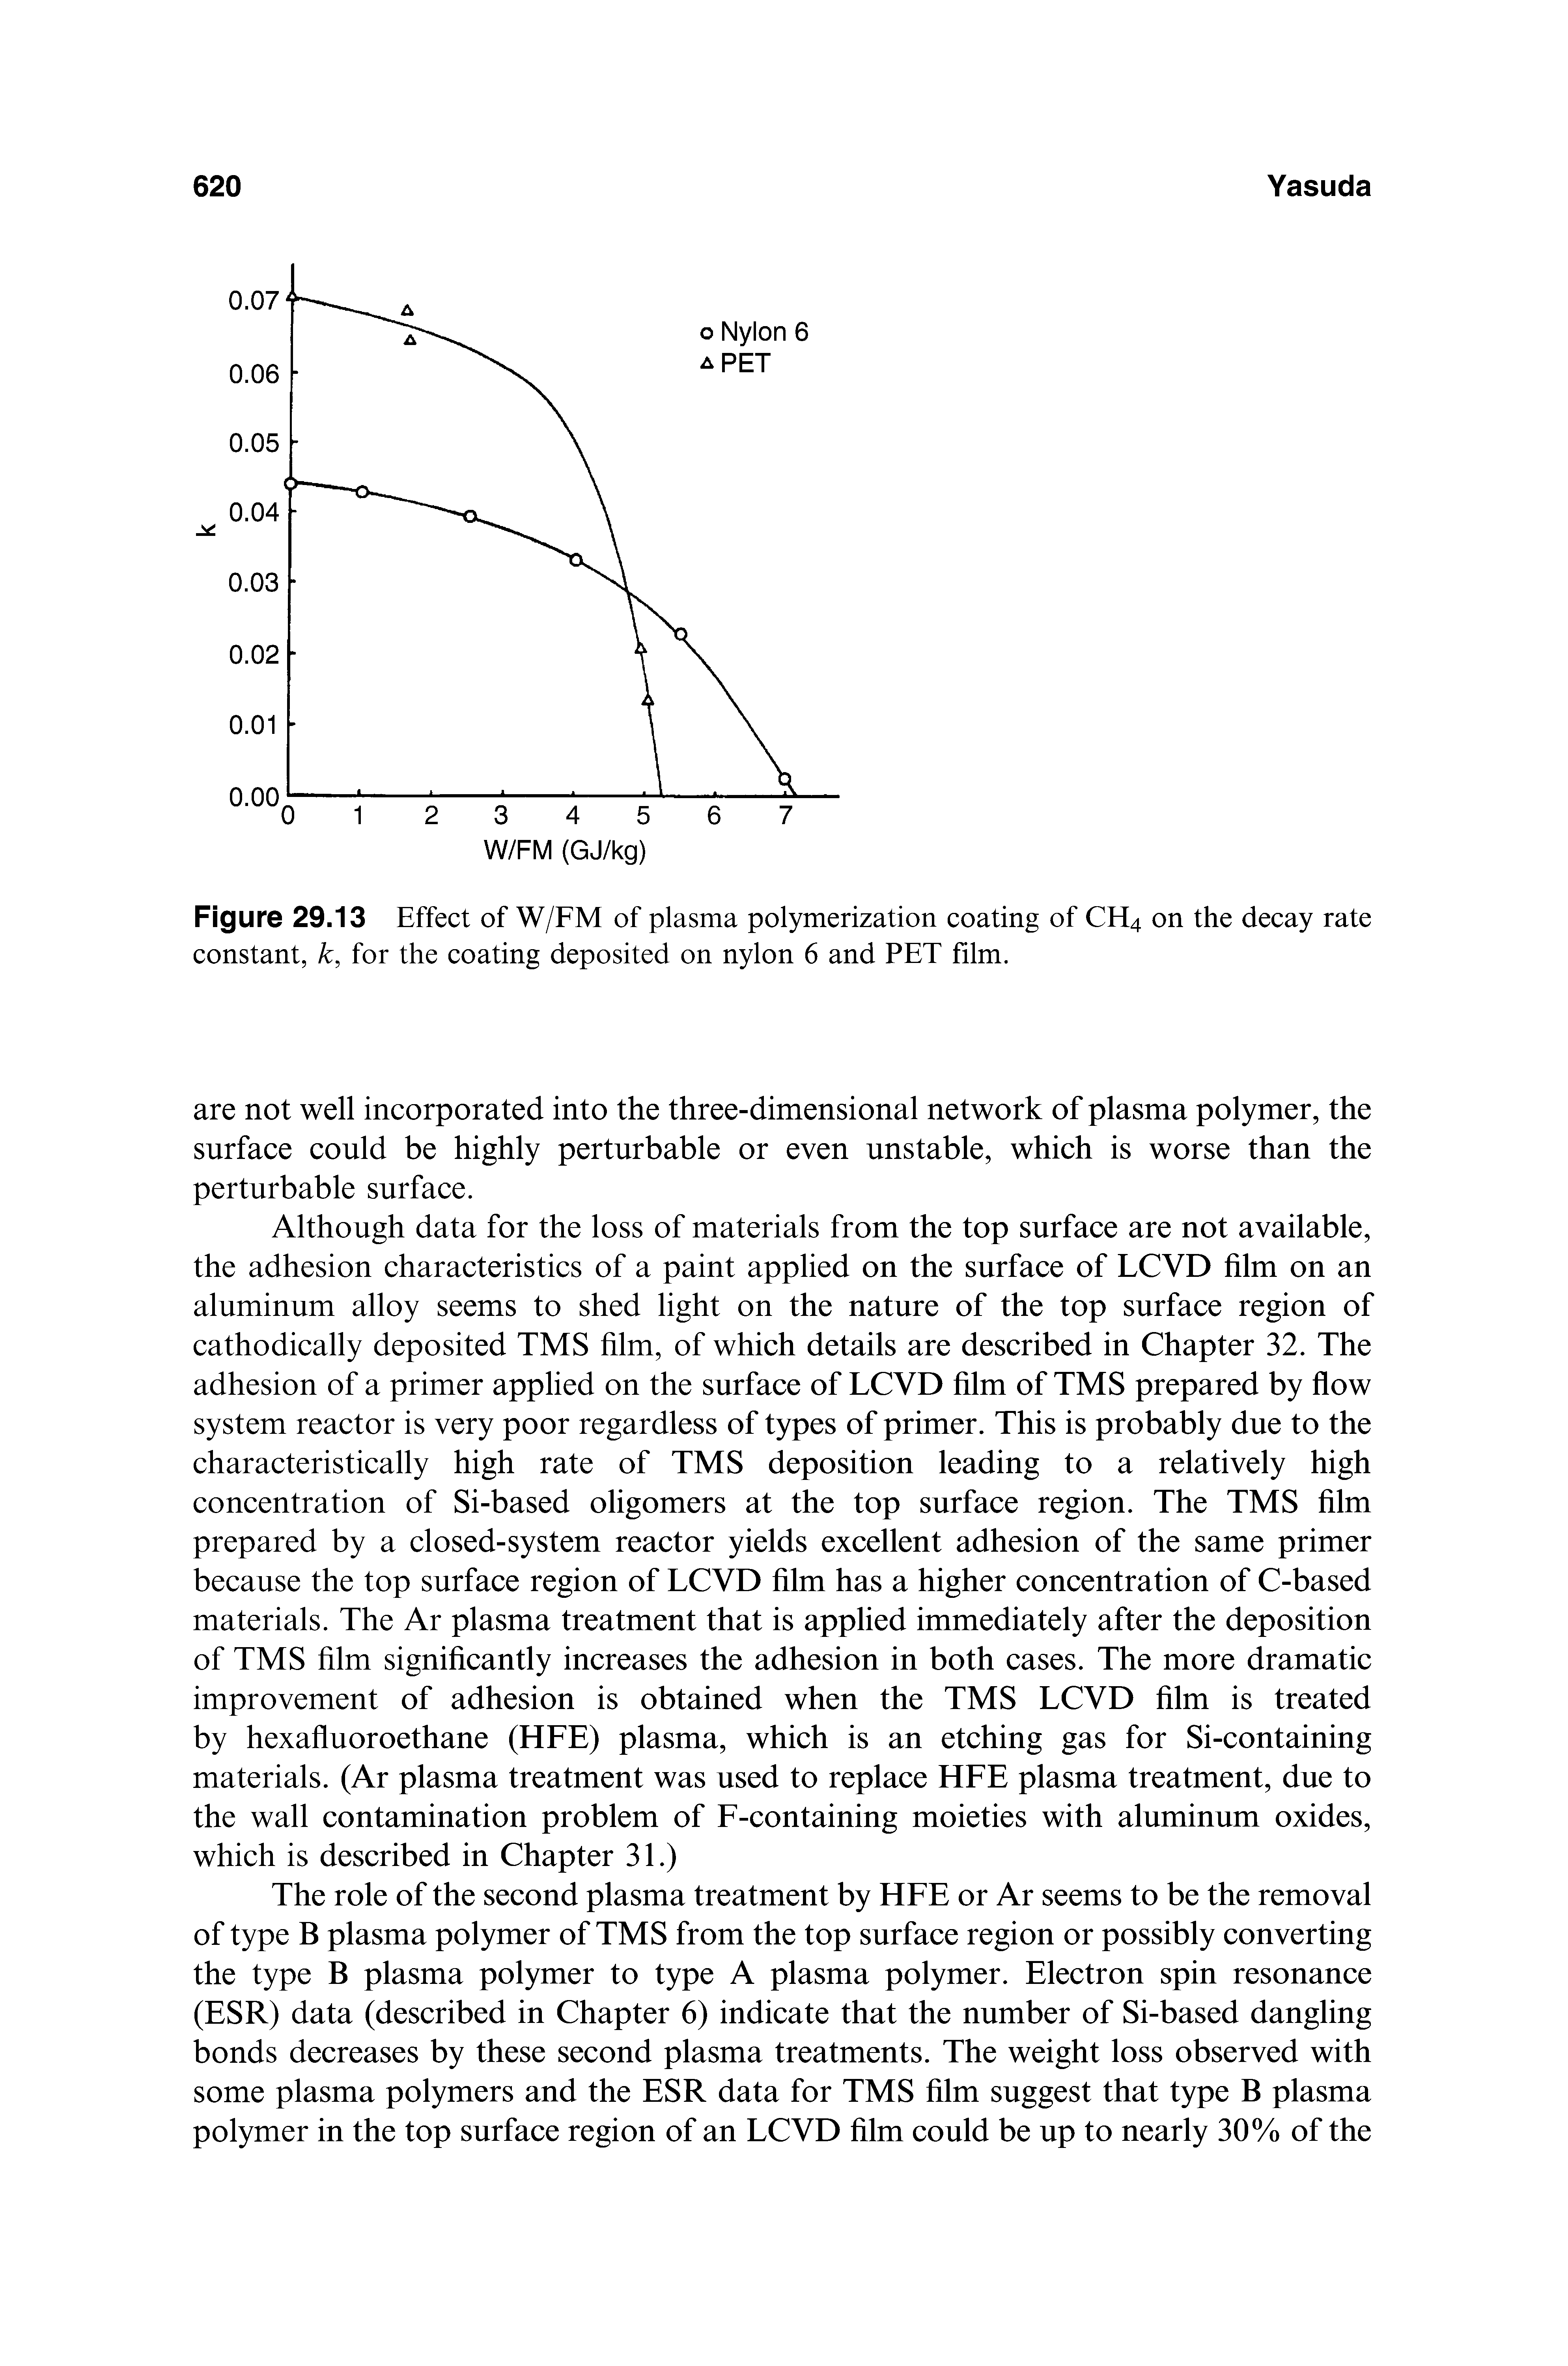 Figure 29.13 Effect of W/FM of plasma polymerization coating of CH4 on the decay rate constant, k, for the coating deposited on nylon 6 and PET film.